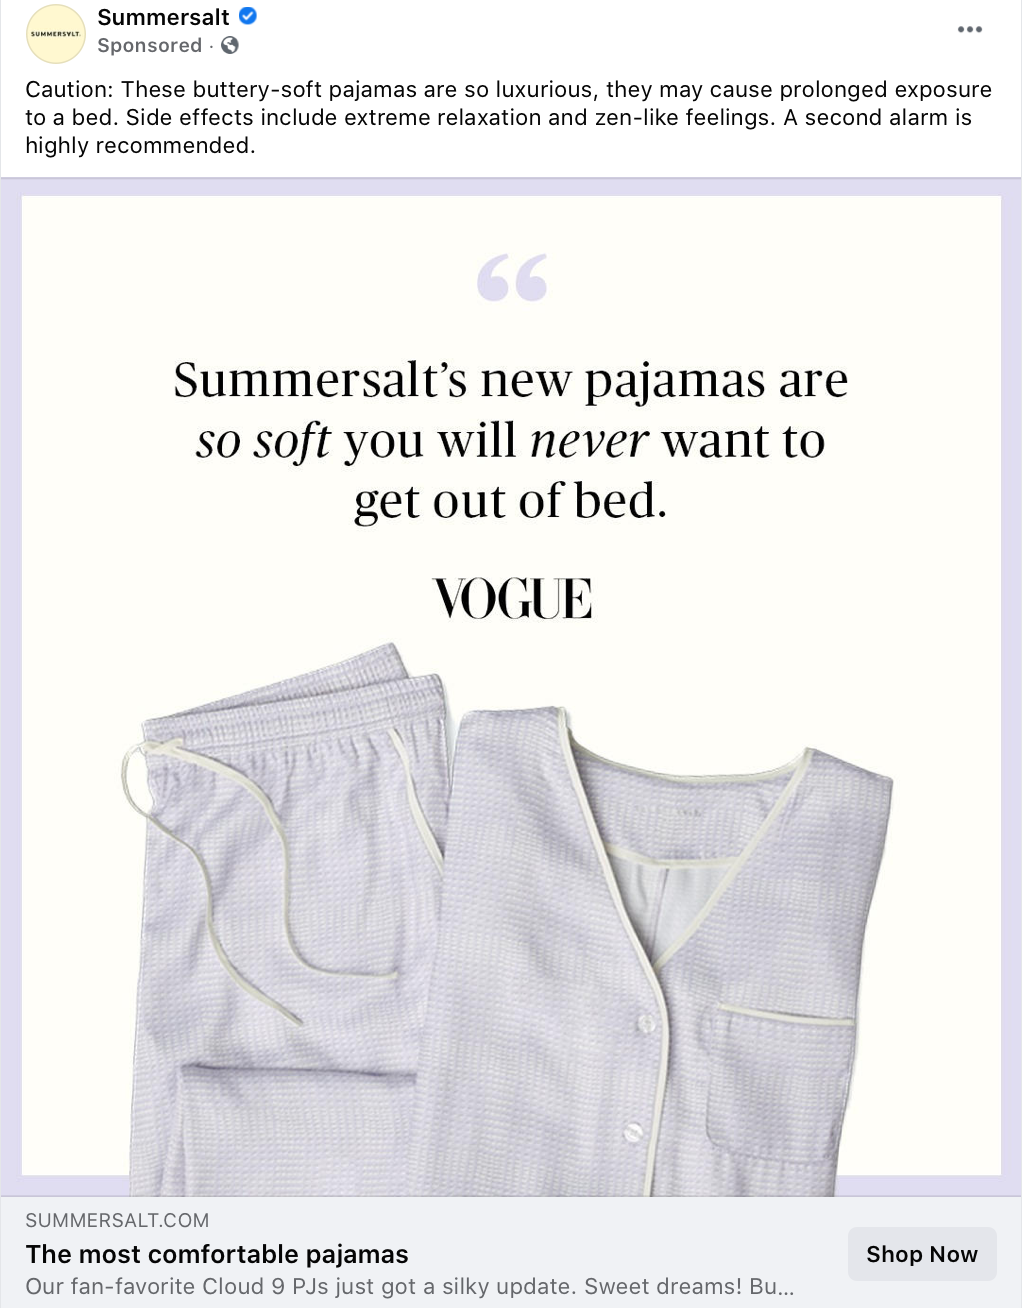 A Facebook ad for pajamas that starts with: "Caution: These buttery-soft pajamas are so luxurious, they may cause prolonged exposure to a bed."